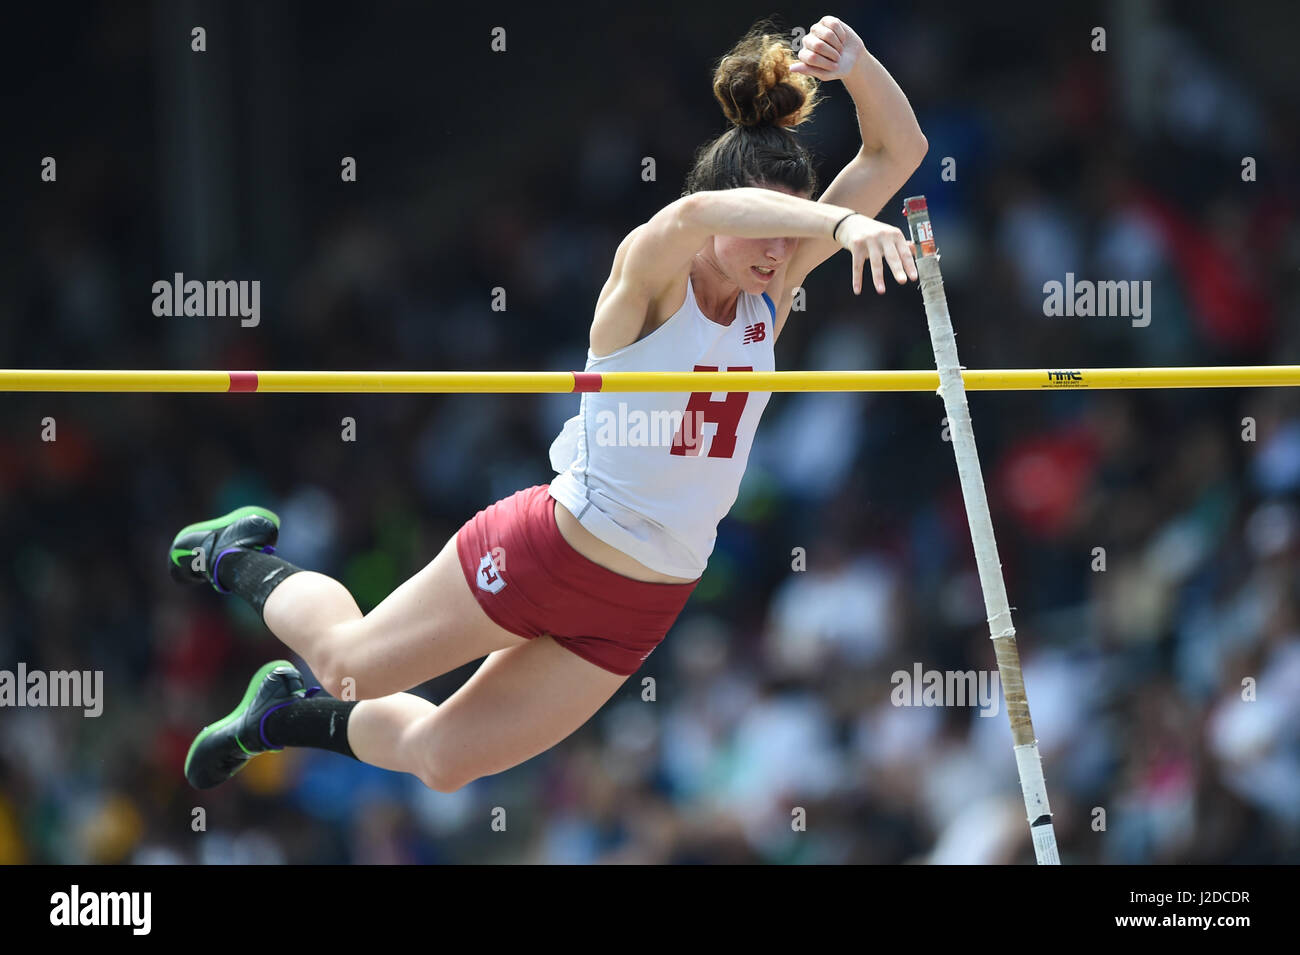 Philadelphia, Pennsylvania, USA. 27th Apr, 2017. Harvard's Marlena Sabatino clears 3.80 meters during the 123rd games games of the 2017 Penn Relays at Franklin Field in Philadelphia, Pennsylvania. Credit: Cal Sport Media/Alamy Live News Stock Photo